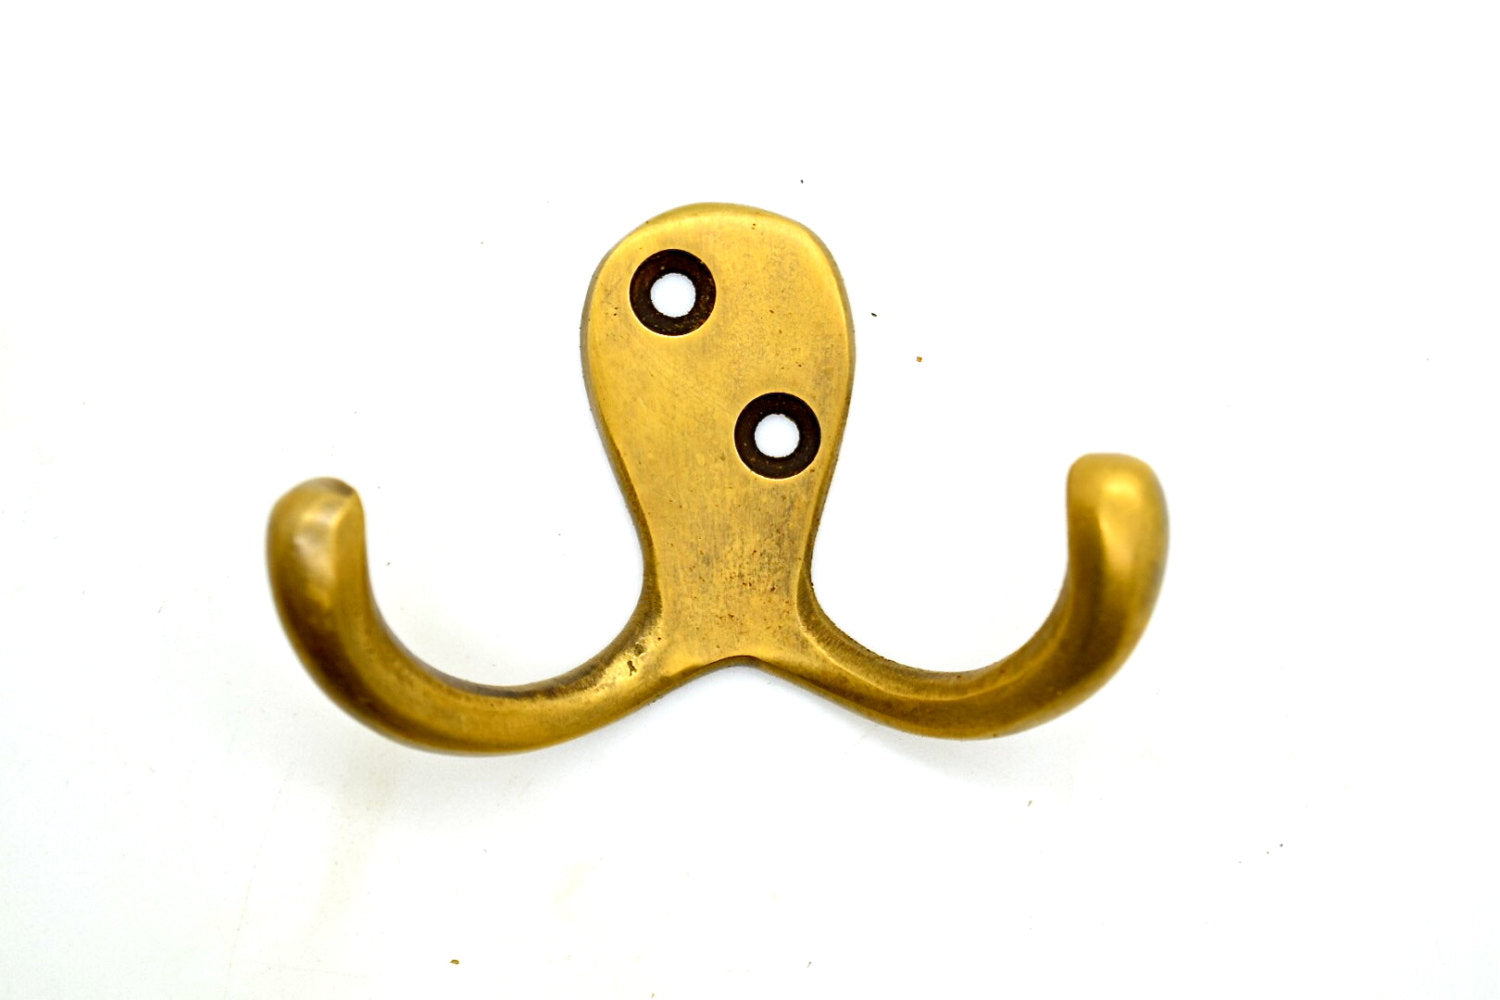 Classical double solid brass wall hook: great for coats or hats.